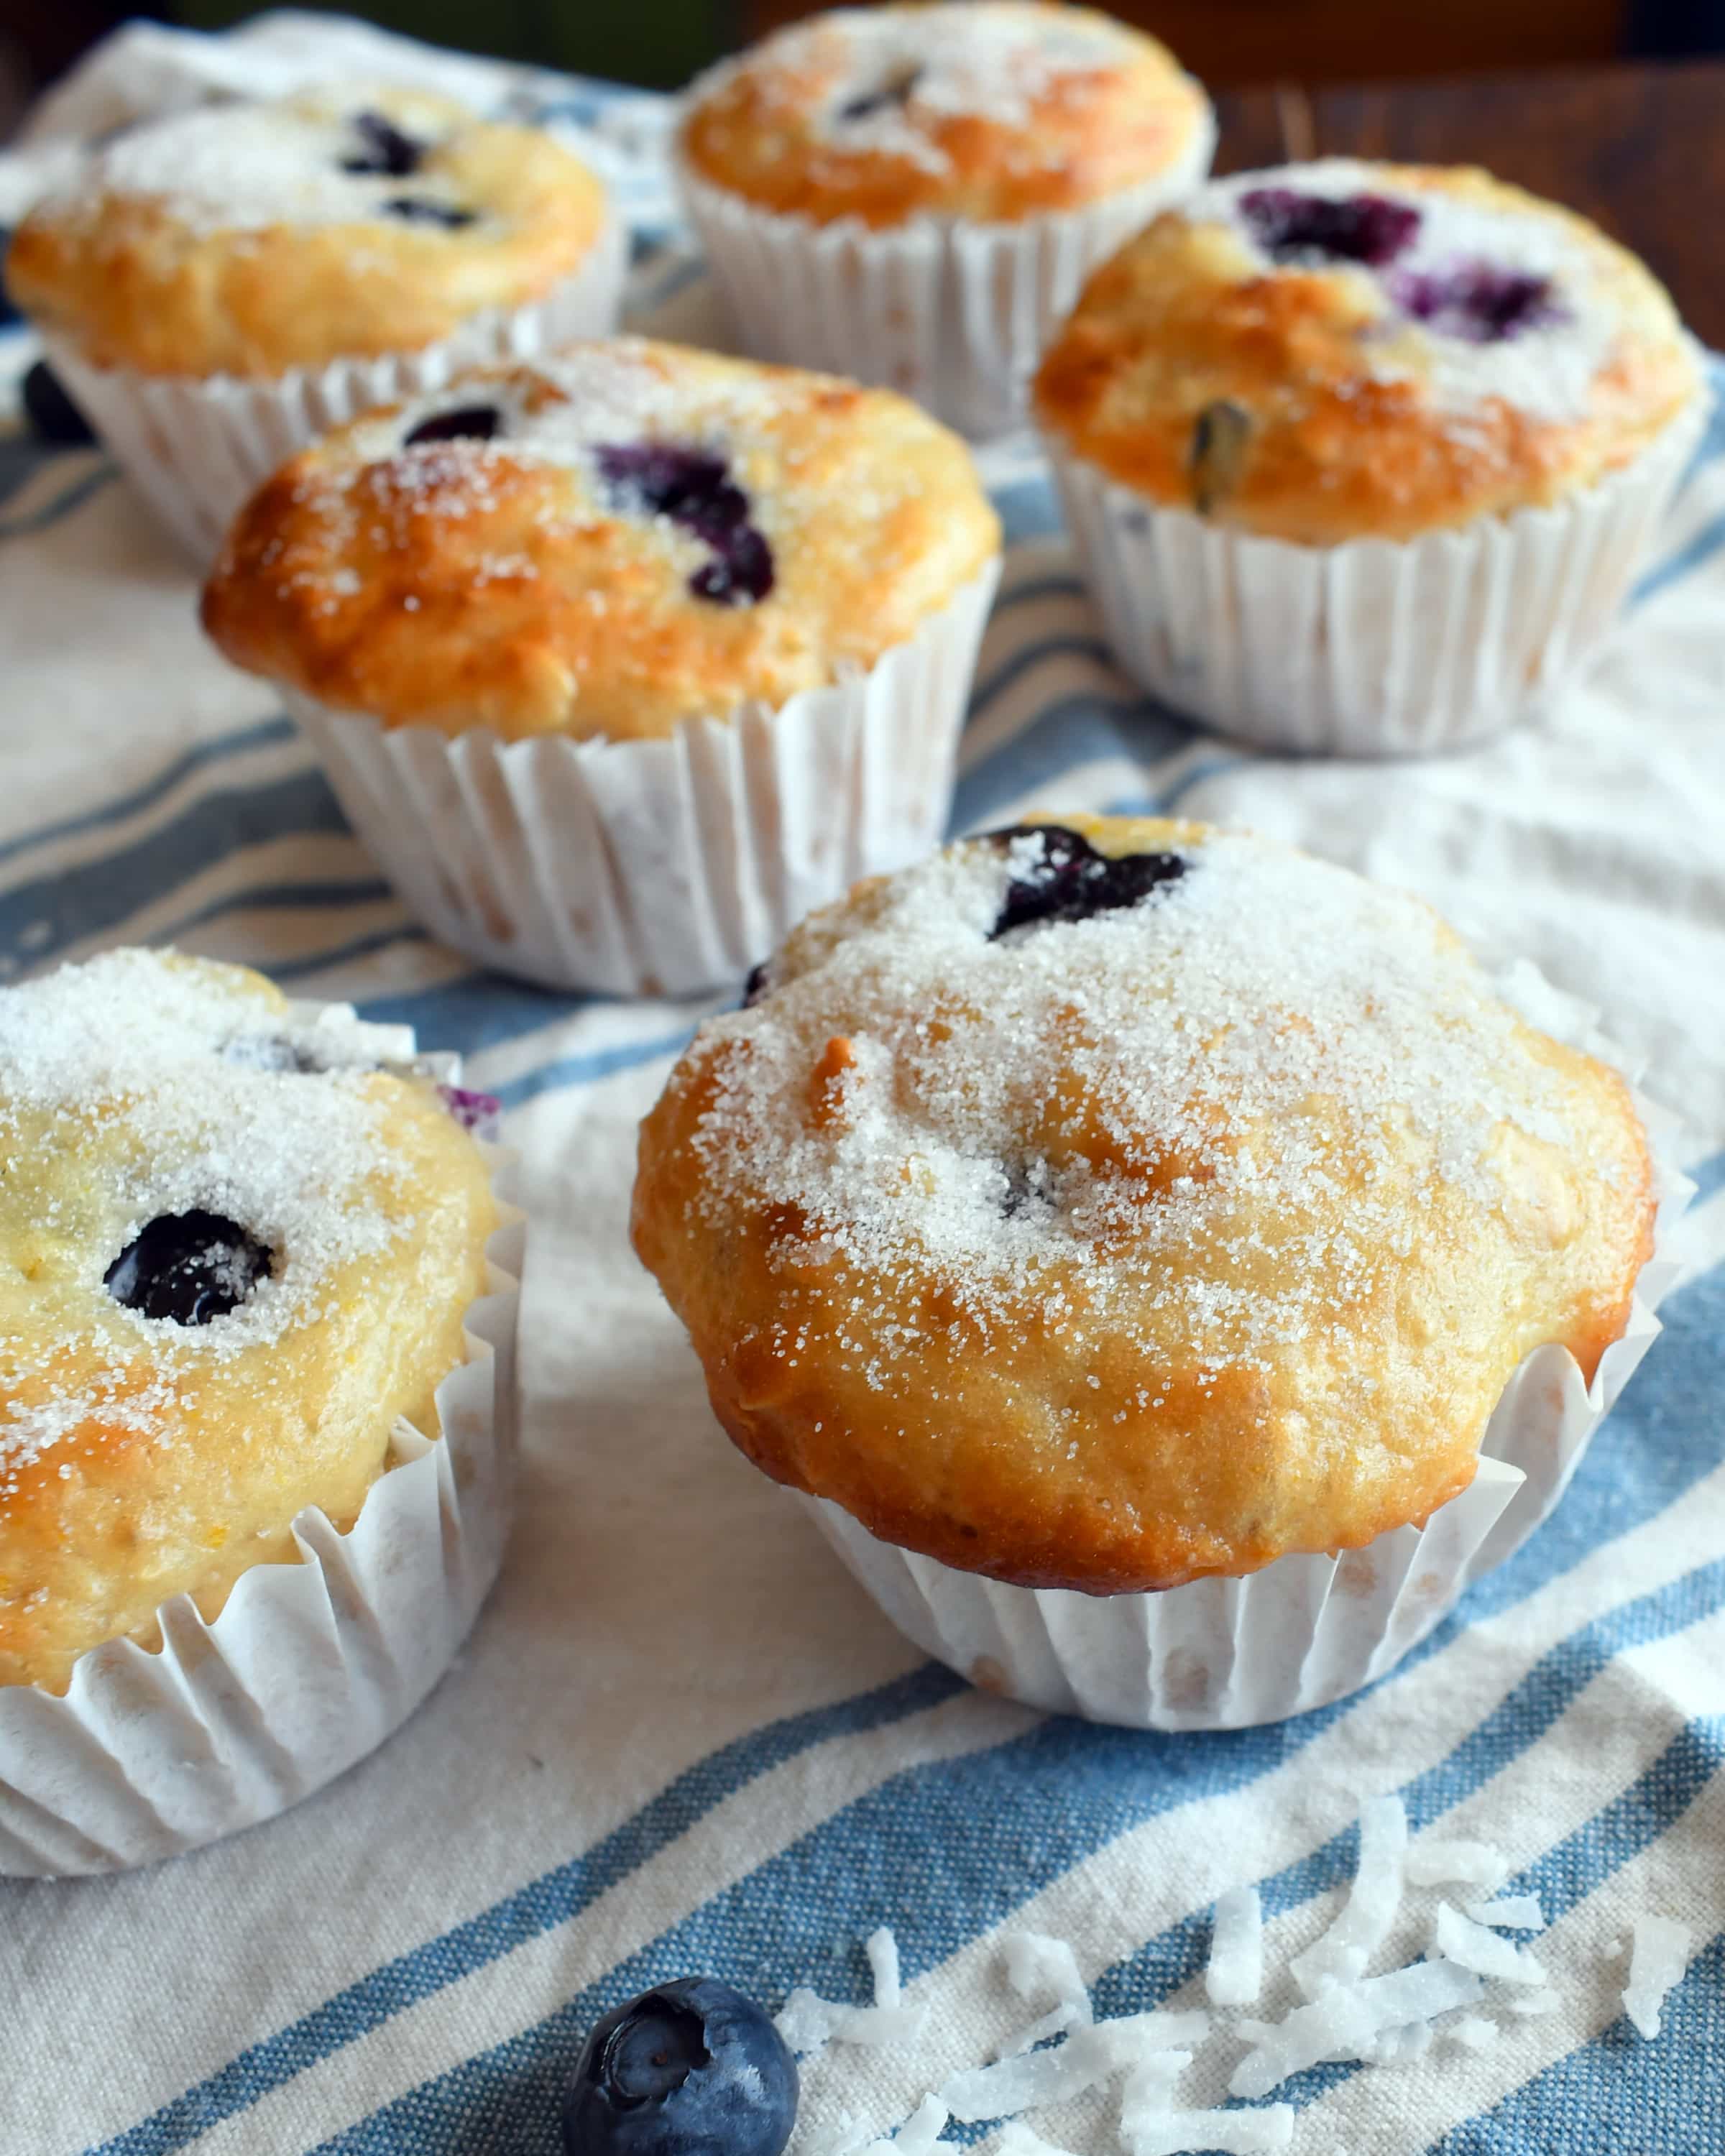 Blueberry coconut orange muffins on a white and blue cloth.